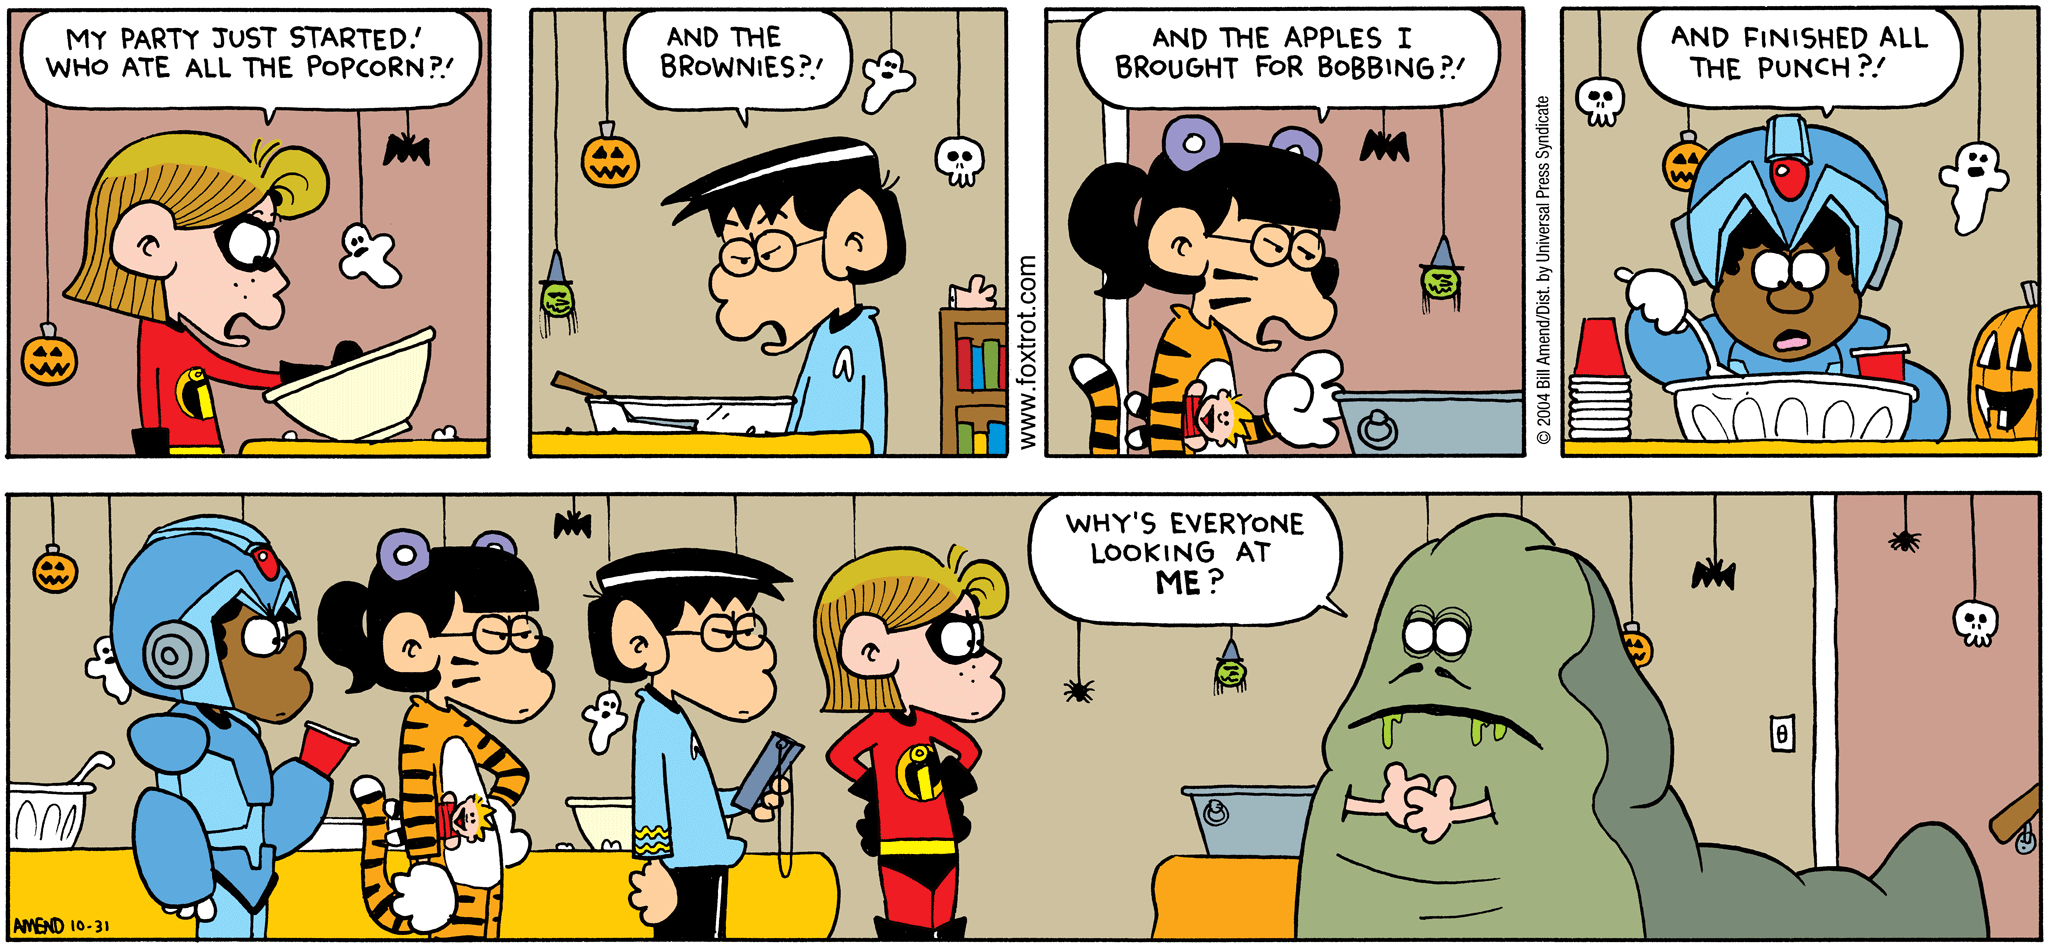 Halloween Comics - FoxTrot comic strip by Bill Amend - Published October 31, 2004 - Eileen: My party just started! Who ate all the popcorn?! Boy: And the brownies?! Phoebe: And the apples I brought for bobbing?! Marcus Jones: And finished all the punch?! Jason Fox: Why's everyone looking at me?